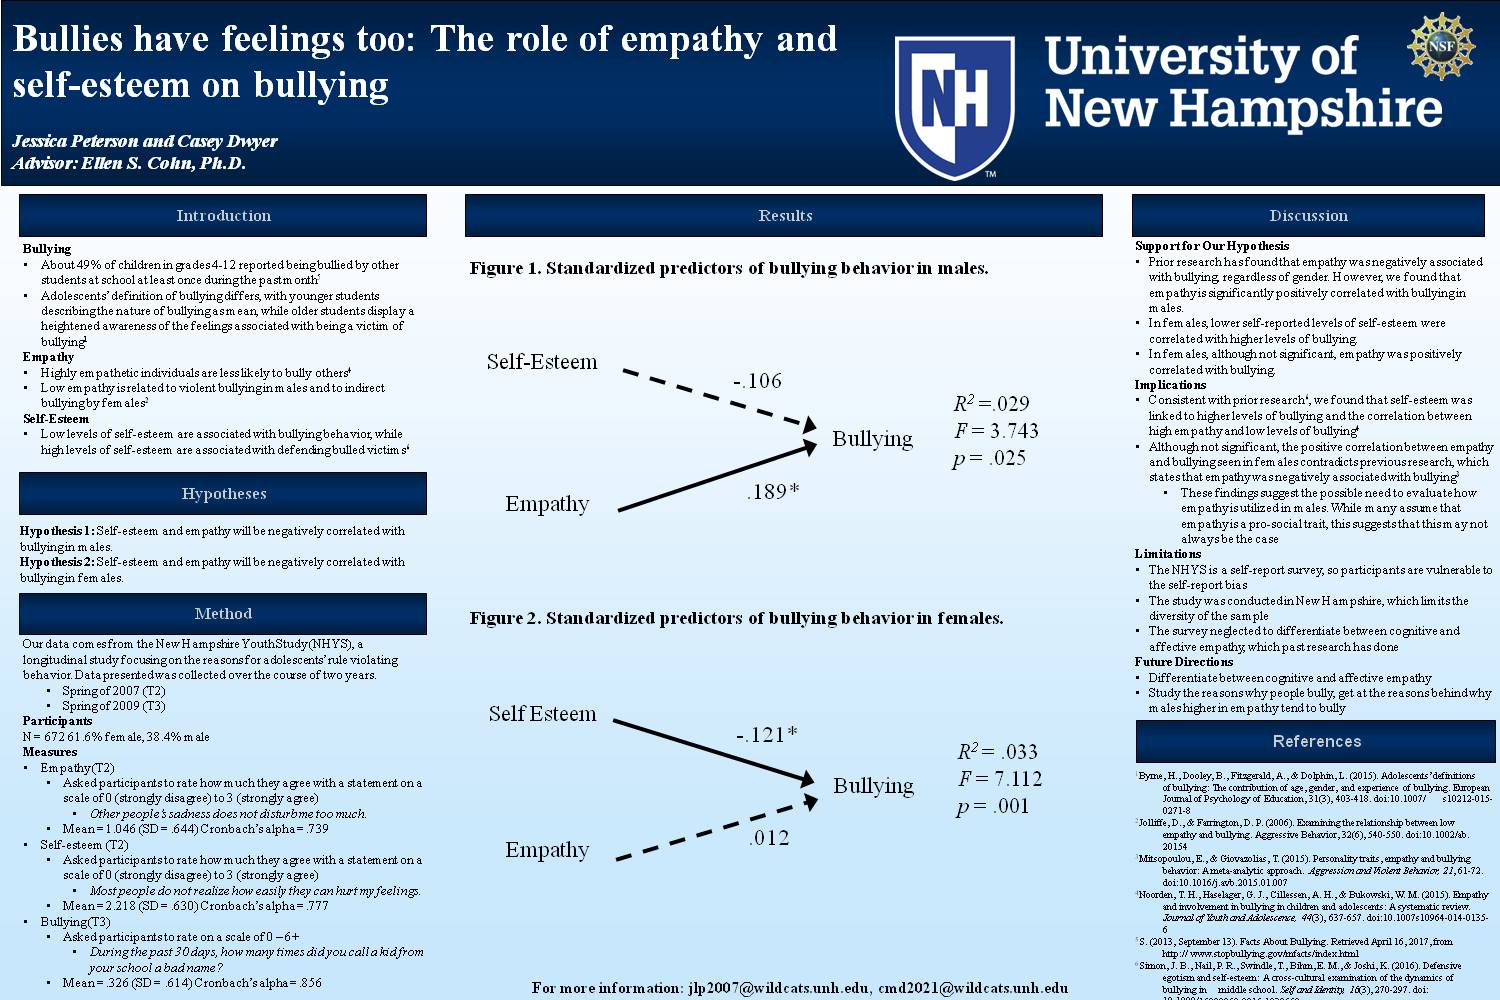 Bullies Have Feelings Too: The Role Of Empathy And Self-Esteem On Bullying by jlp2007